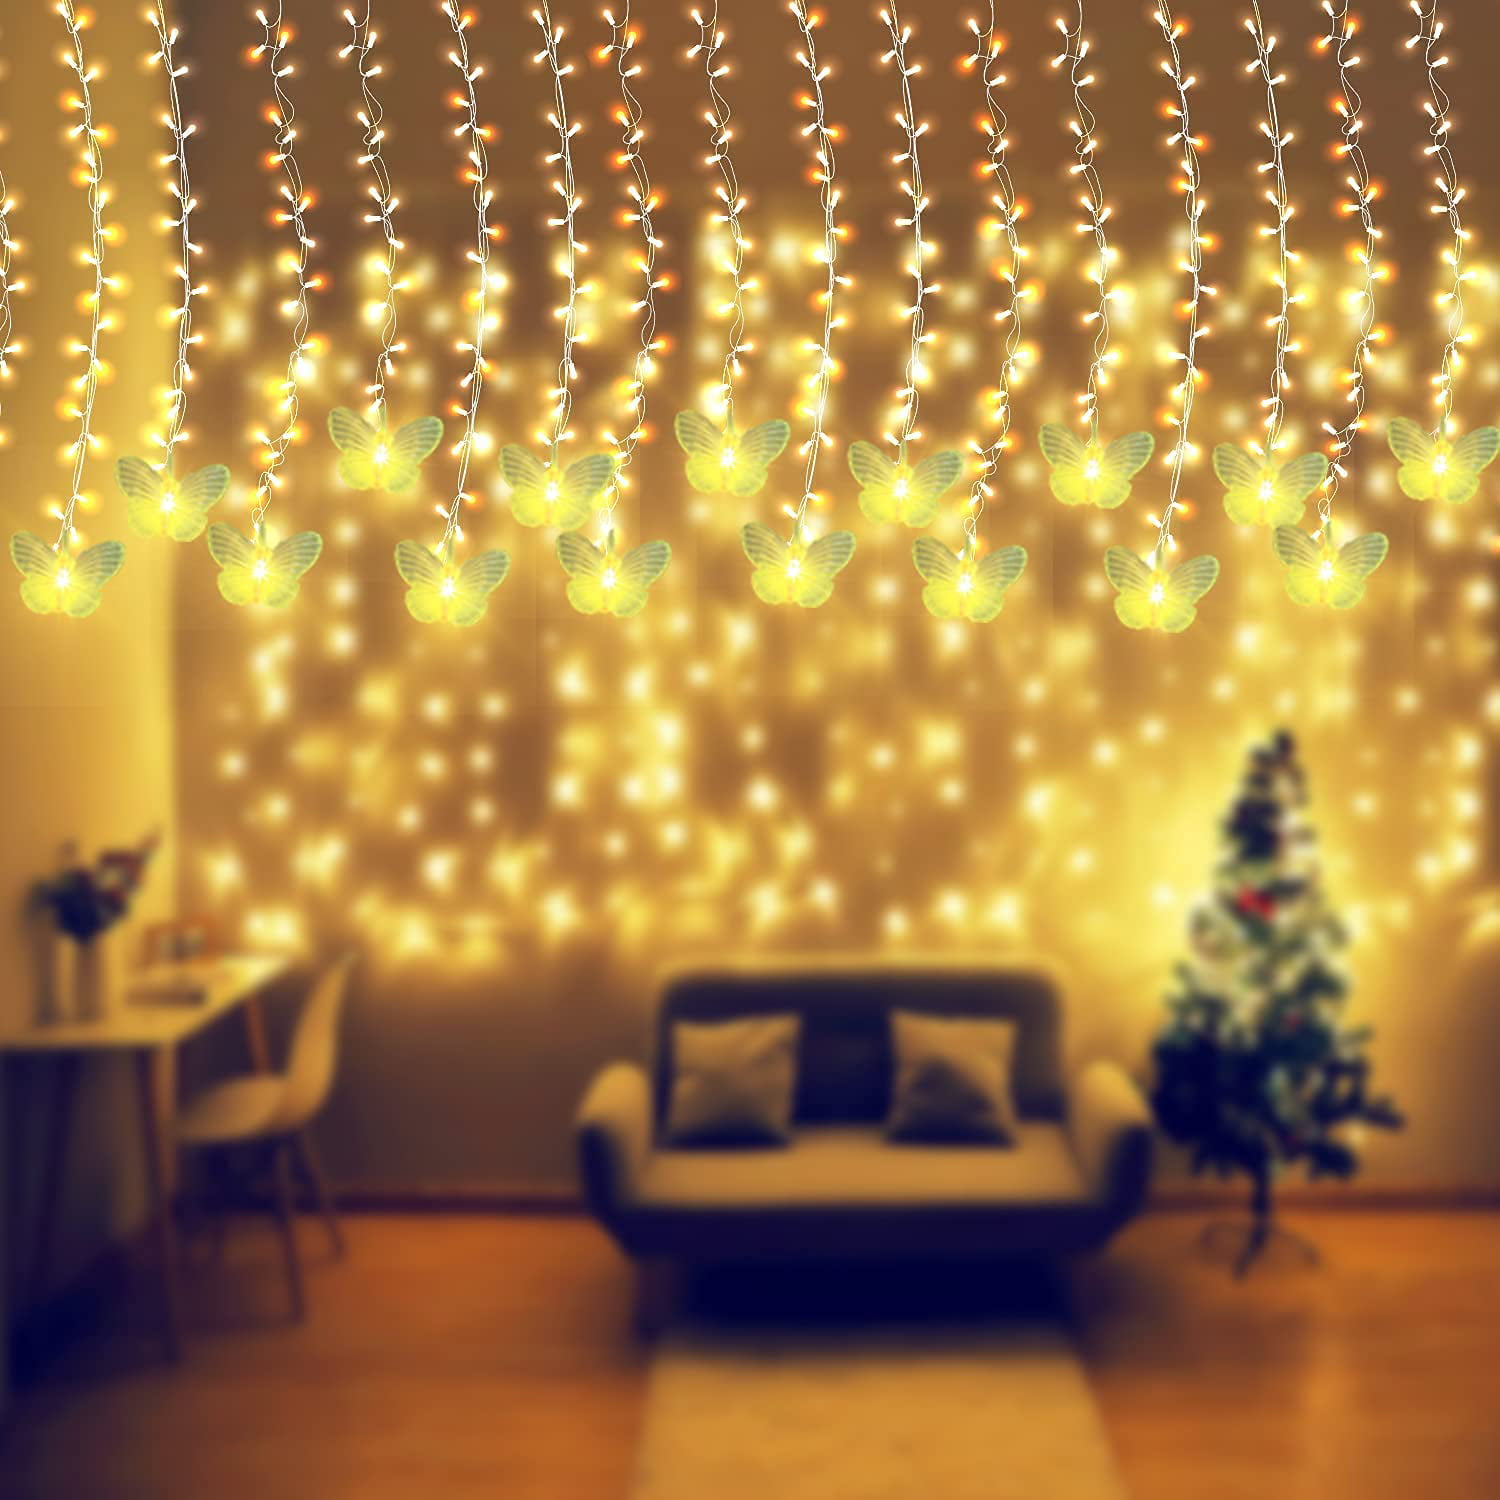 Star String Lights Battery Operated LED Twinkle Lights 50pcs LED Indoor Fairy Lights Warm White for Patio Wedding Bedroom Princess Castle Garden Birthday Party Indoor Outdoor Decoration LiyuanQ FS-D010